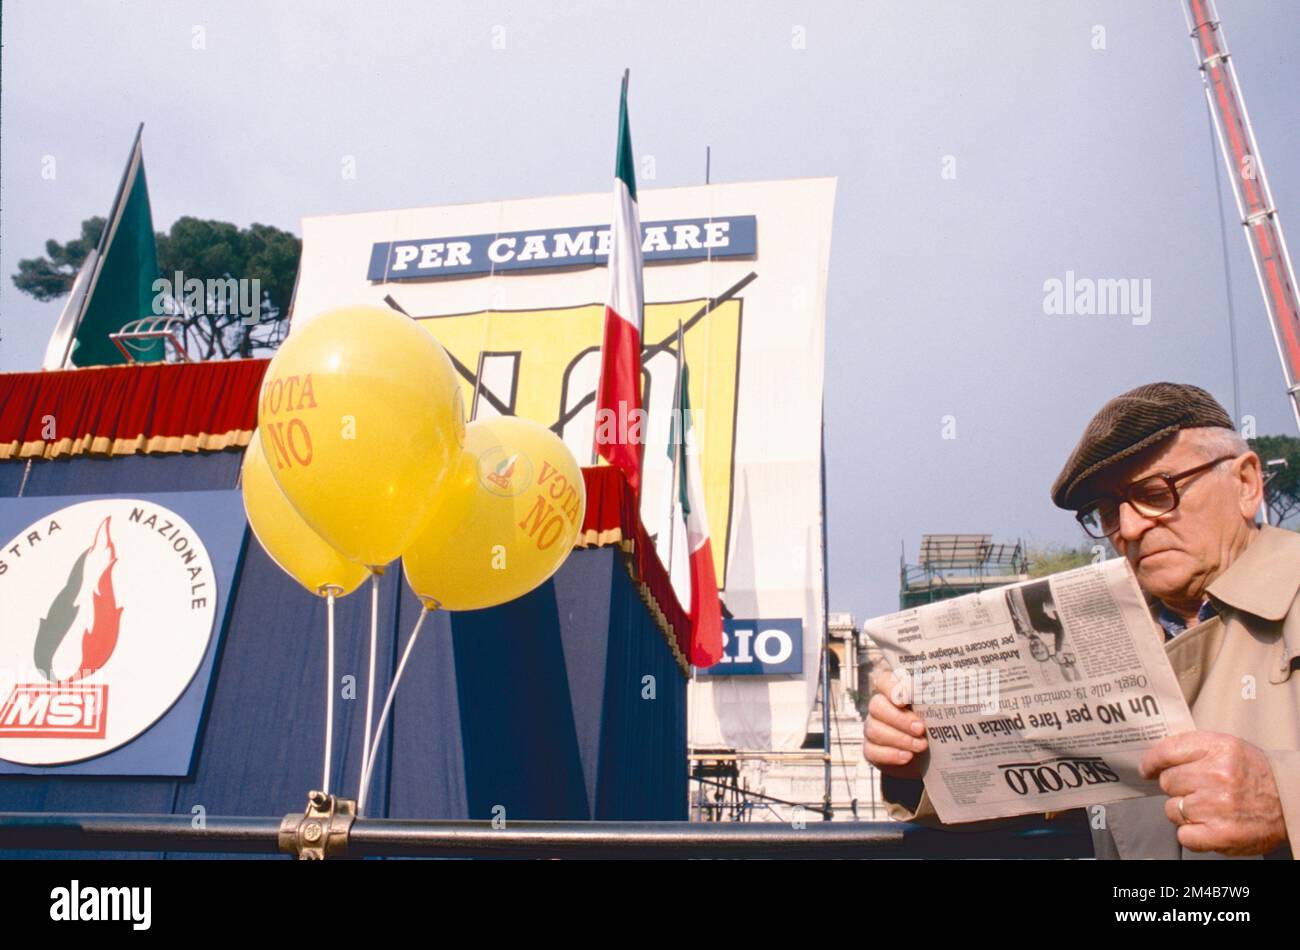 Old man reading the newspaper at the closing of the MSI-DN political party electoral campain, Rome, Italy 1993 Stock Photo